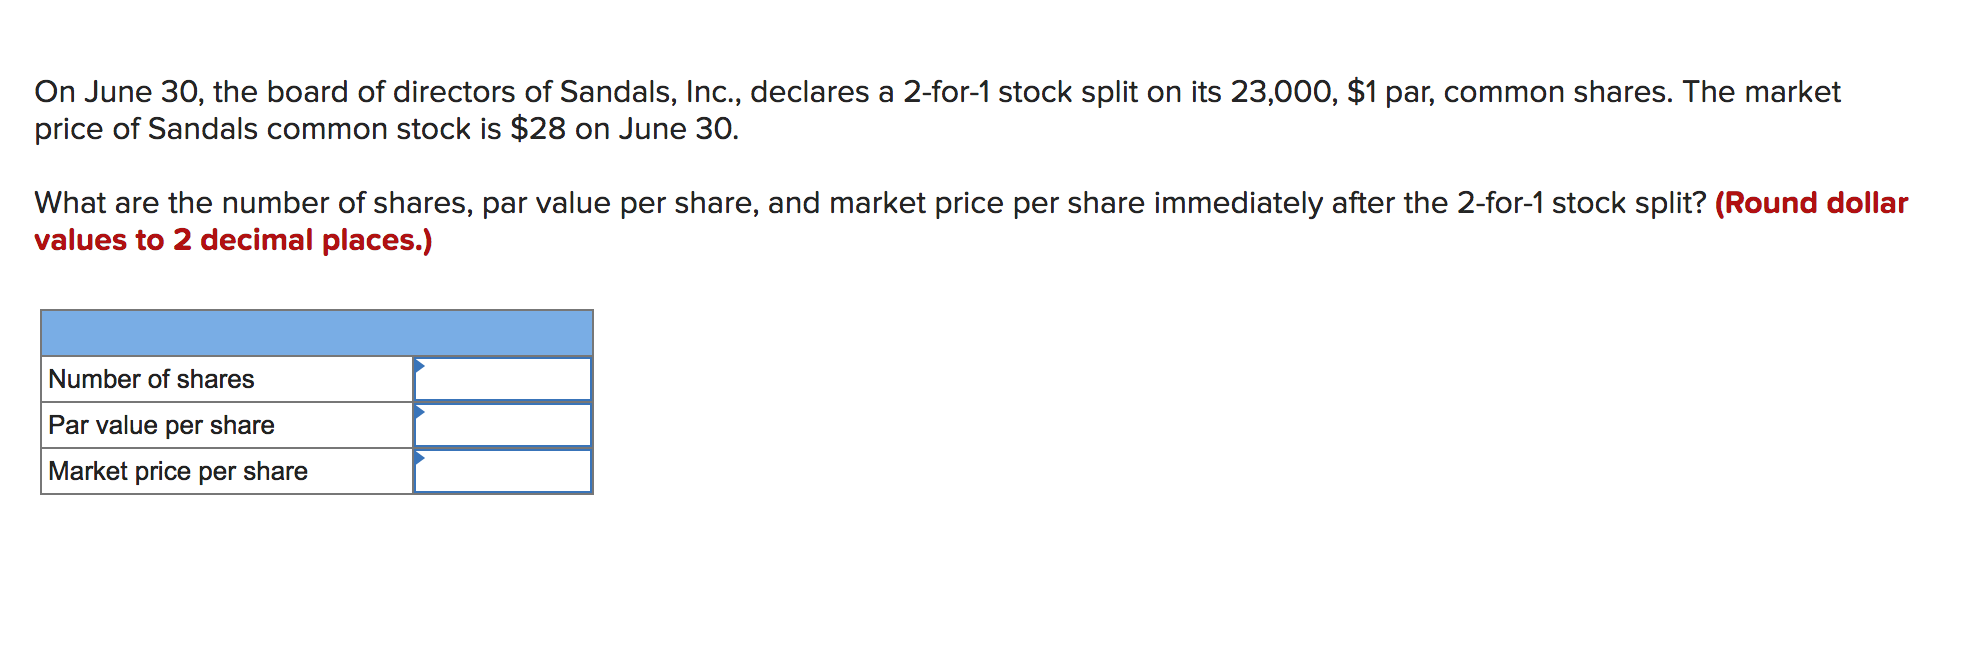 On June 30, the board of directors of Sandals, Inc., declares a 2-for-1 stock split on its 23,000, $1 par, common shares. The market
price of Sandals common stock is $28 on June 30.
What are the number of shares, par value per share, and market price per share immediately after the 2-for-1 stock split? (Round dollar
values to 2 decimal places.)
Number of shares
Par value per share
Market price per share
